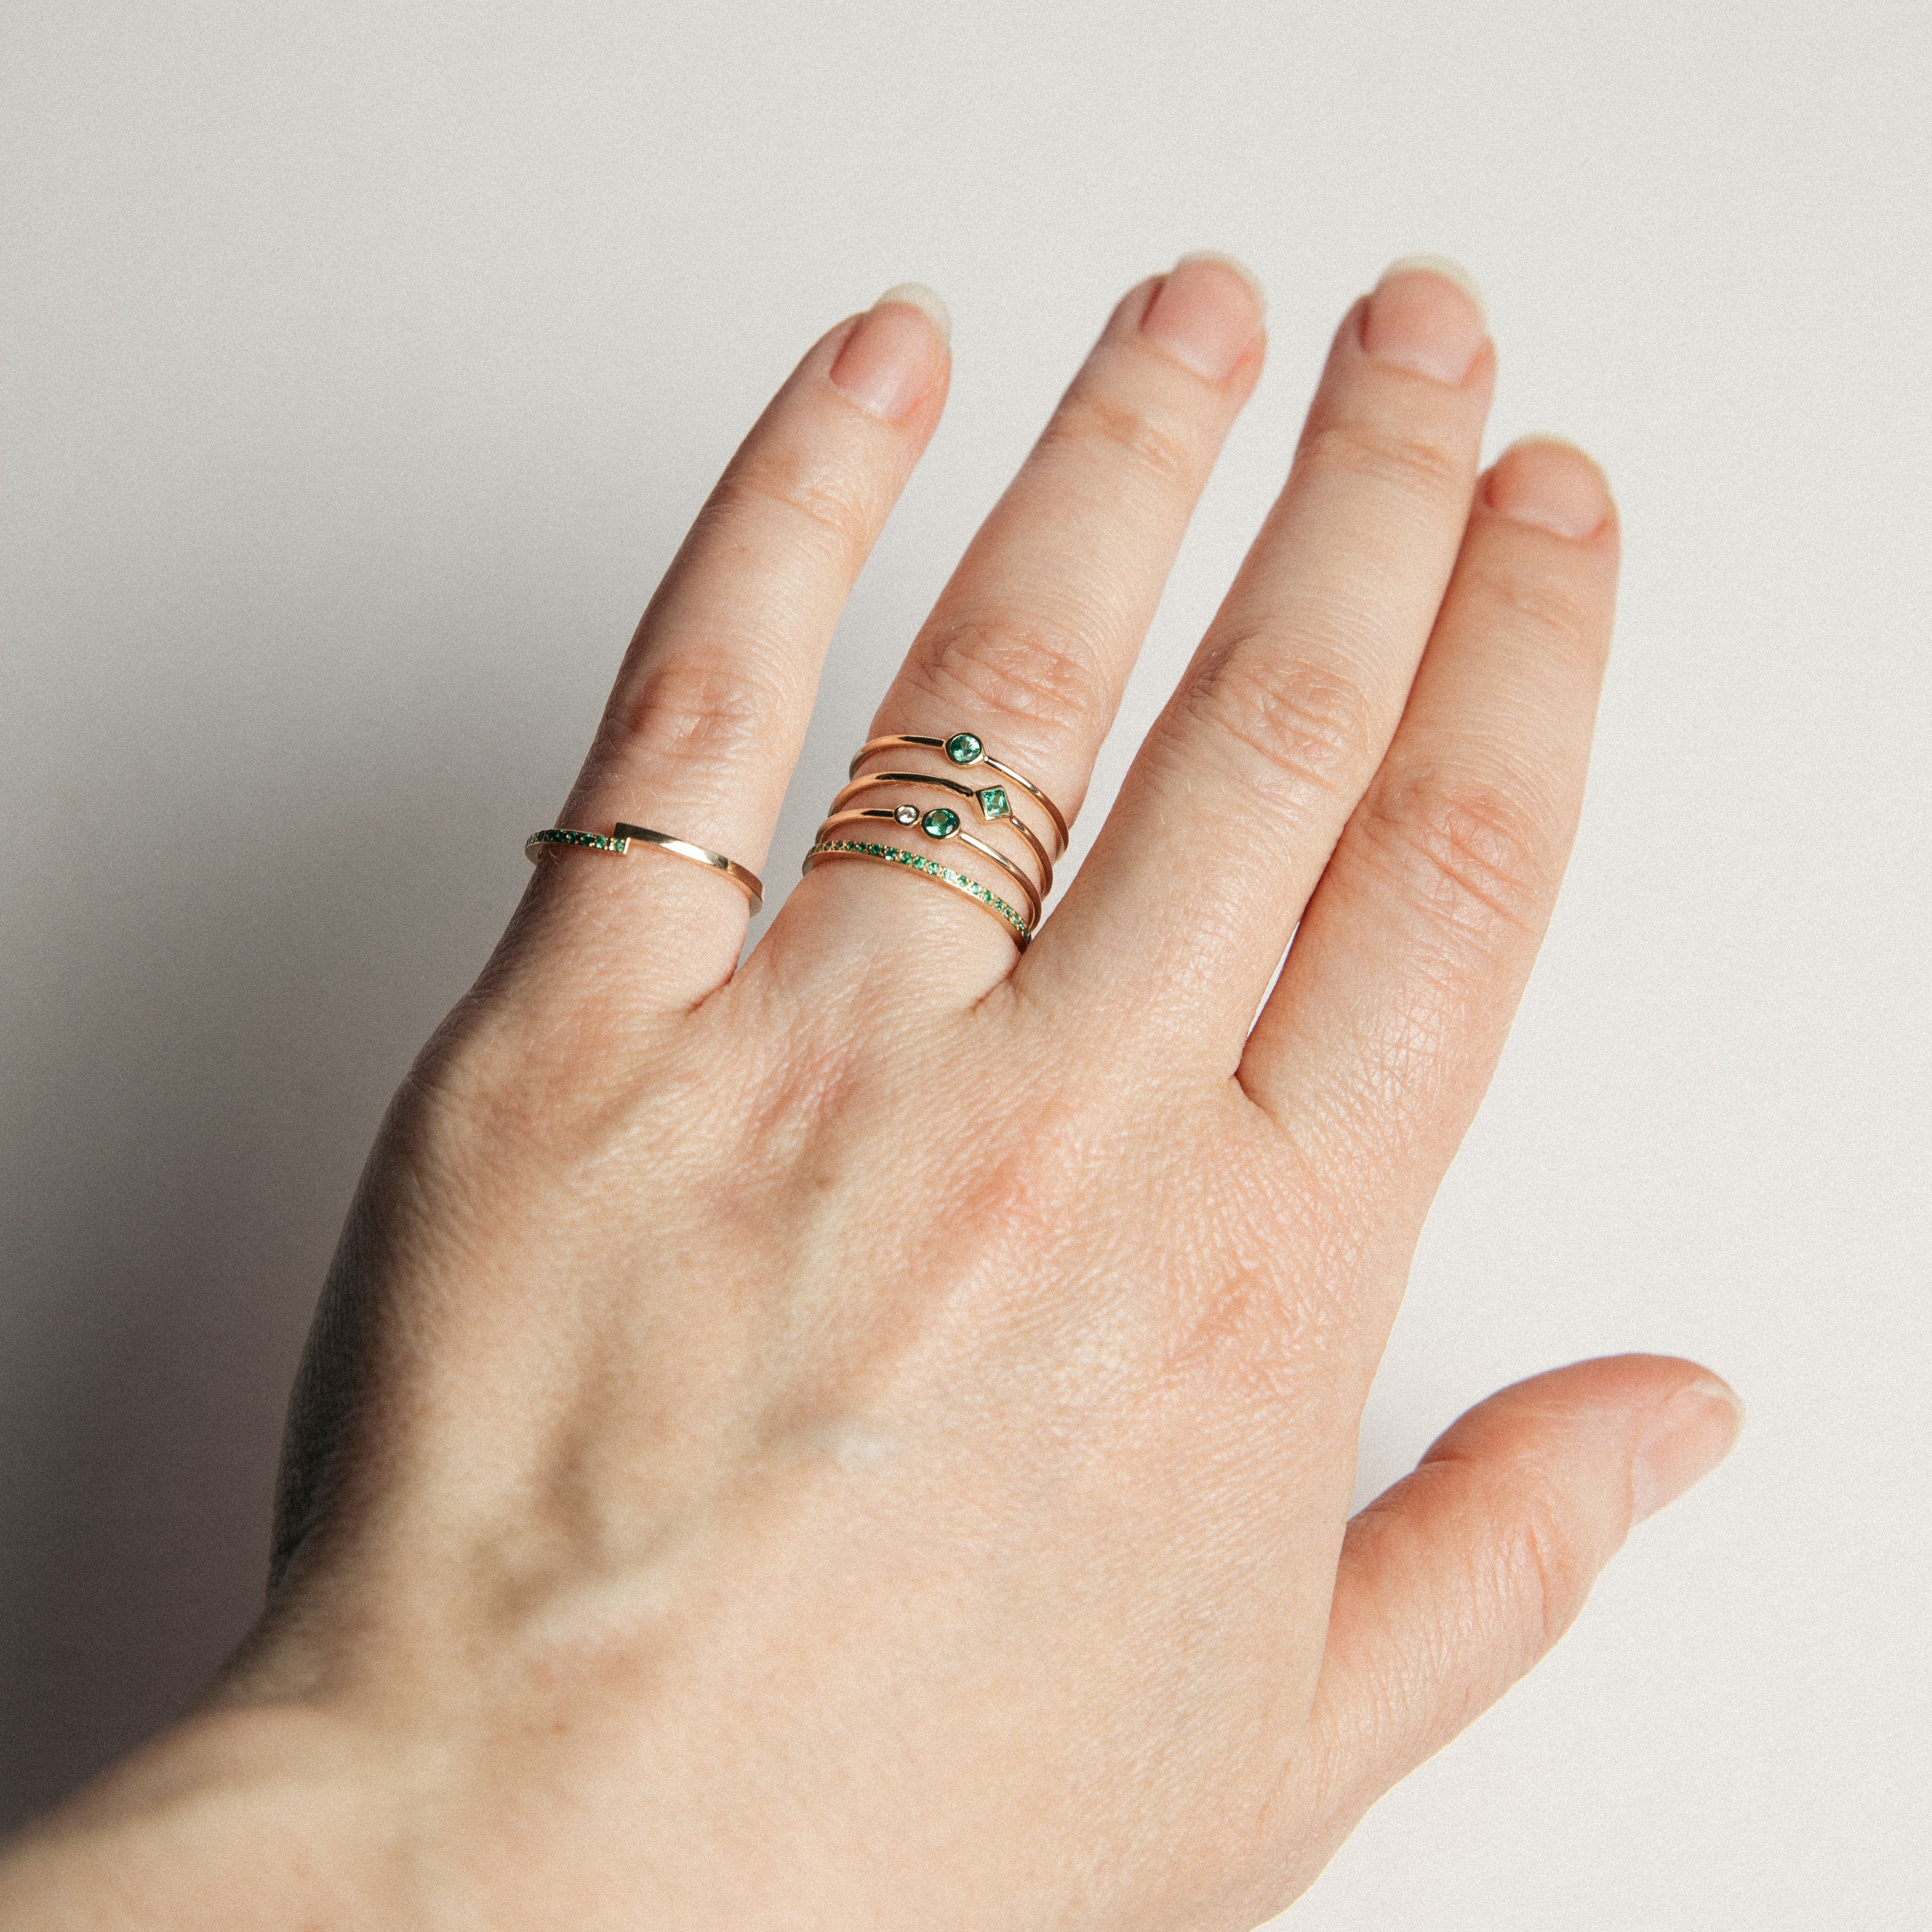 Kiki Delicate Ring in 14k Gold set with Emerald by SHW Fine Jewelry NYC